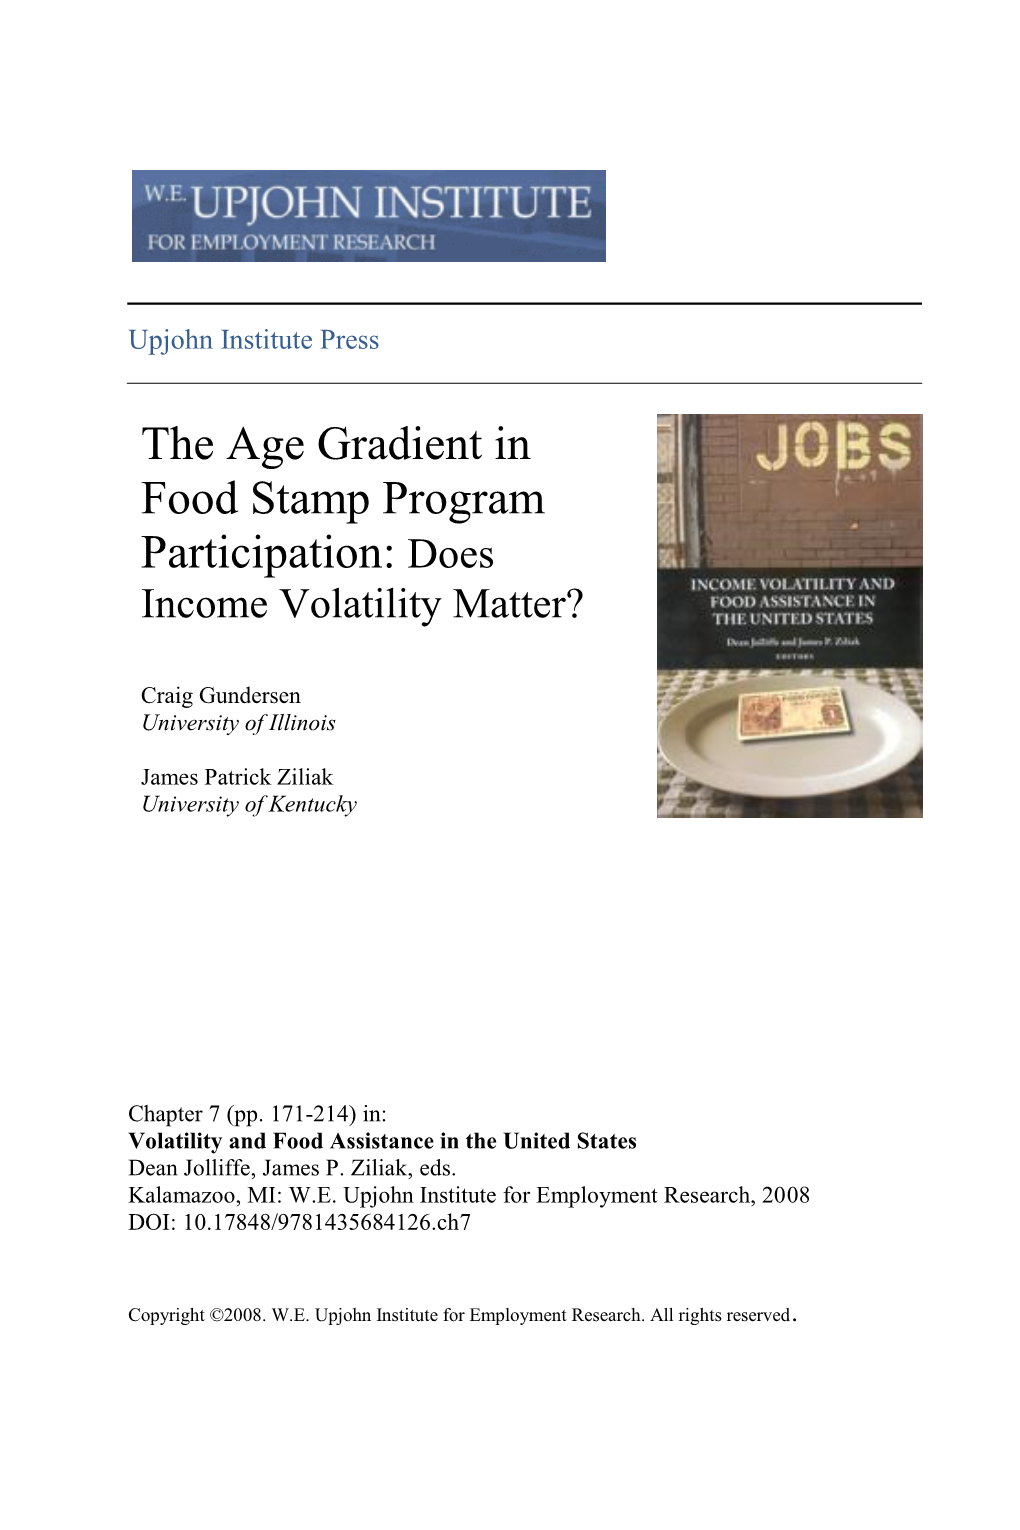 The Age Gradient in Food Stamp Program Participation: Does Income Volatility Matter?